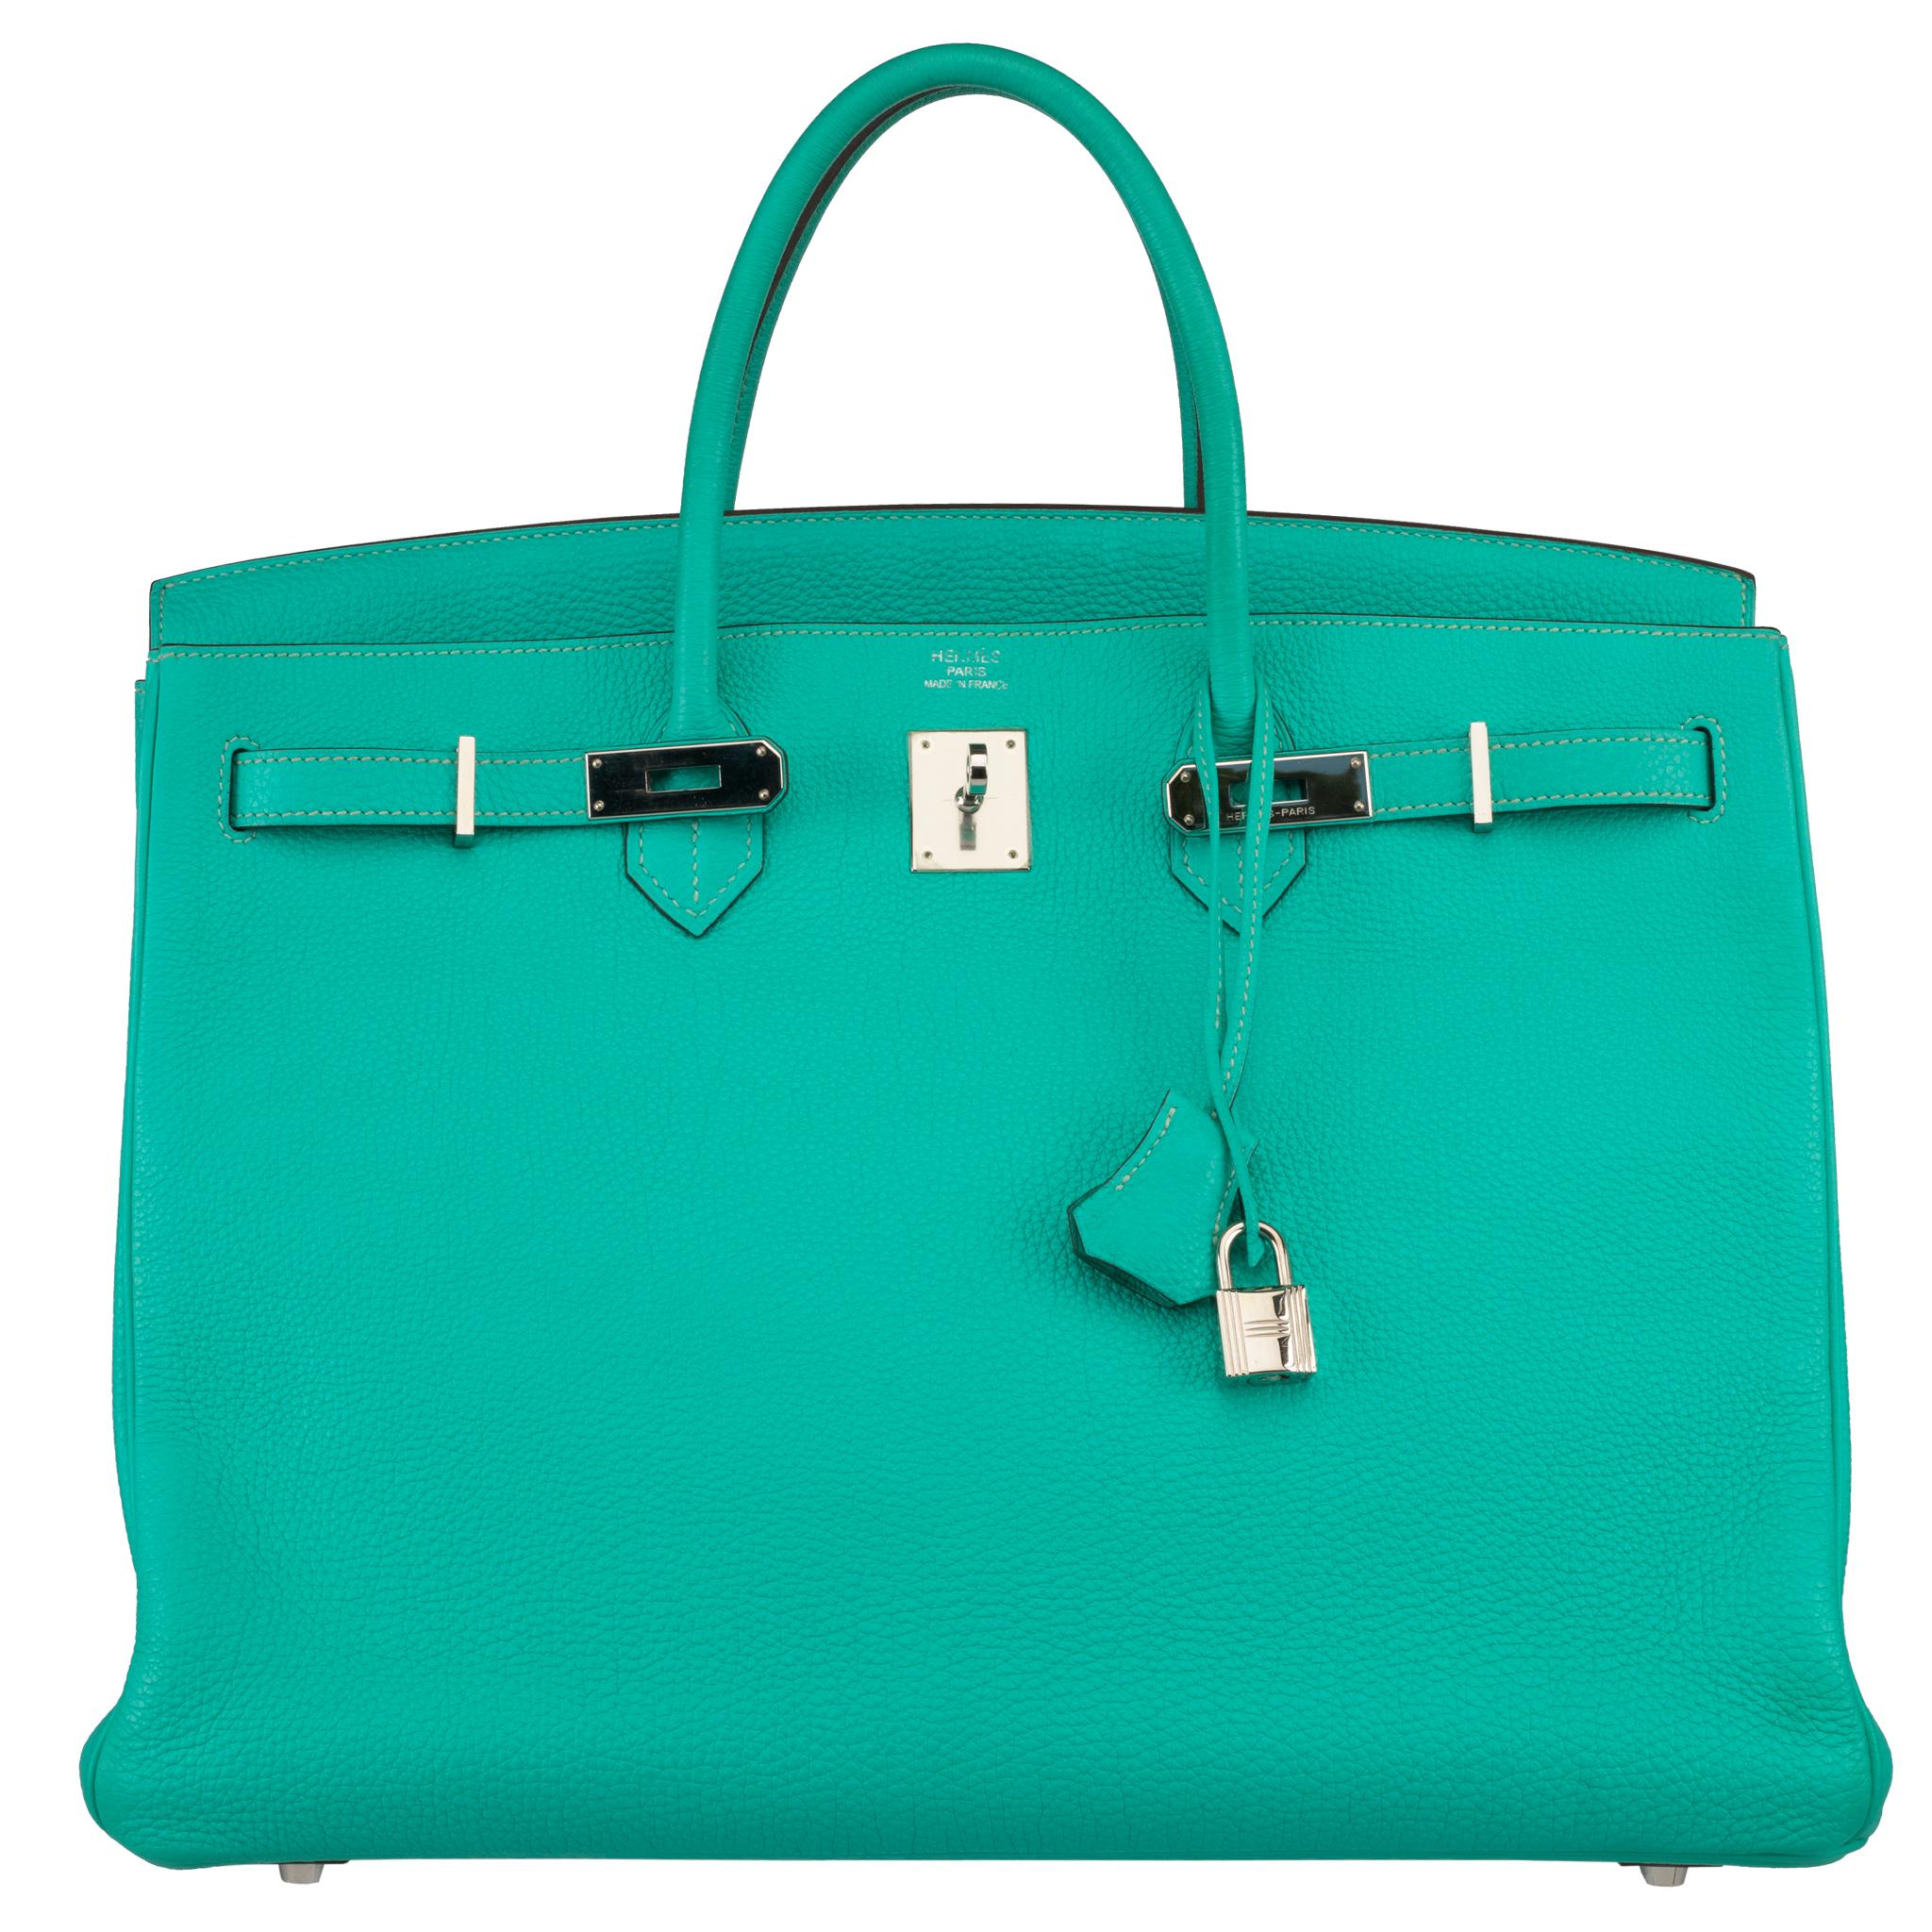 Brand: Hermès 
Style: Birkin Retourne
Size: 40cm
Color: Lagoon
Leather: Togo Leather
Hardware: Palladium
Year: 2009 M

Condition: Preloved Excellent:

Age is consistent with general wear, handbag retains structure, and the leather shows minimal